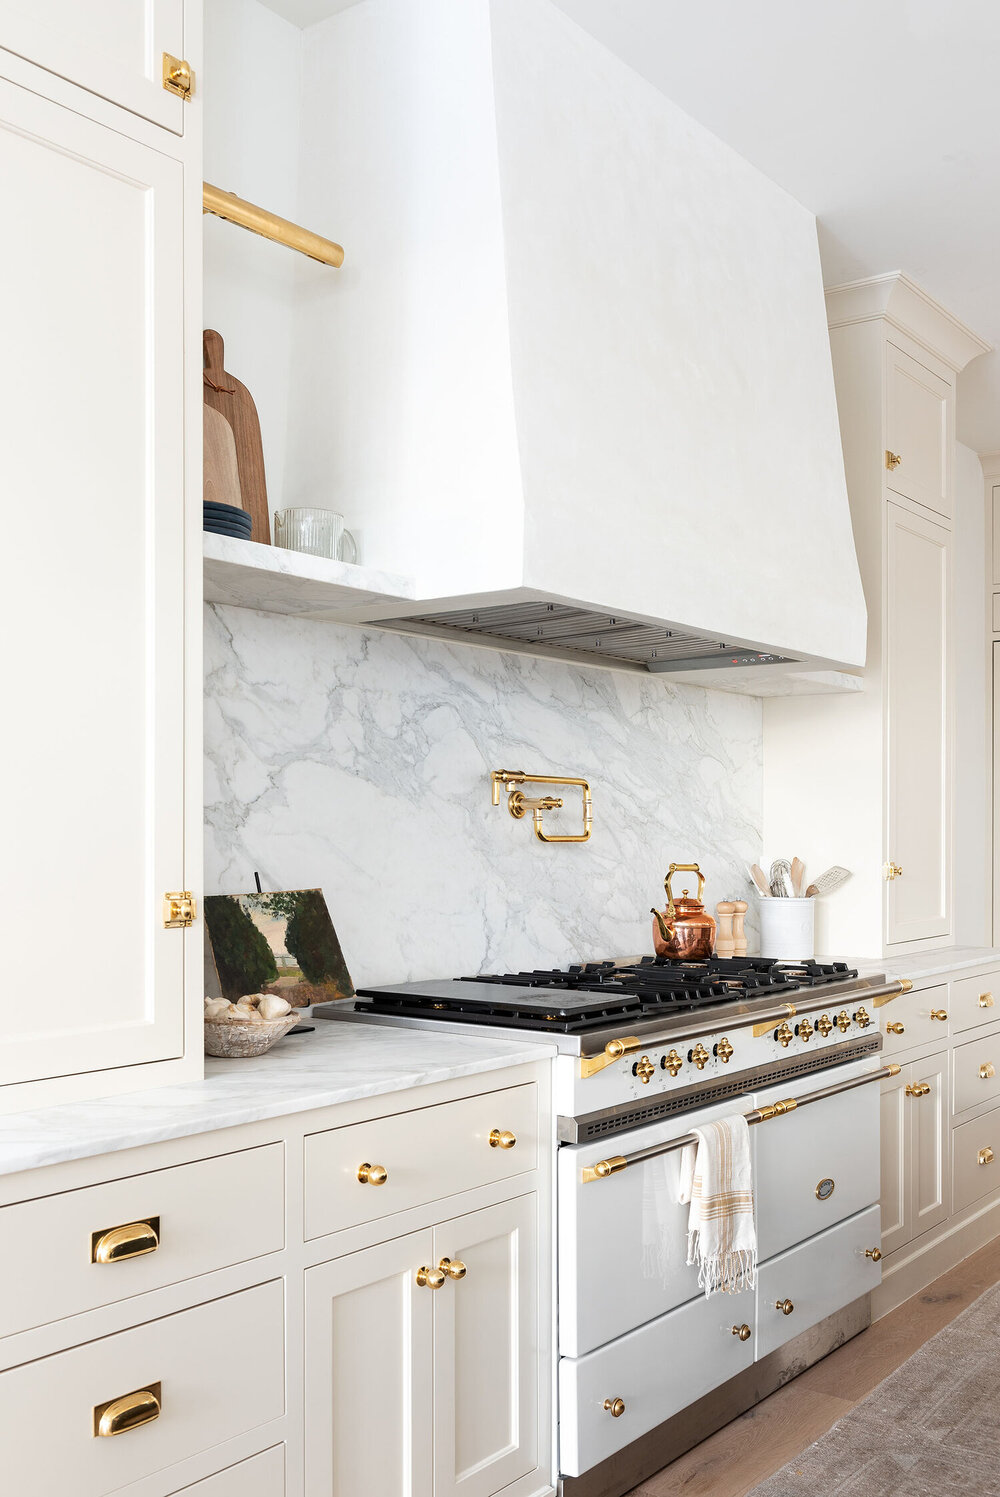 What You Need to Know About Custom Cabinetry